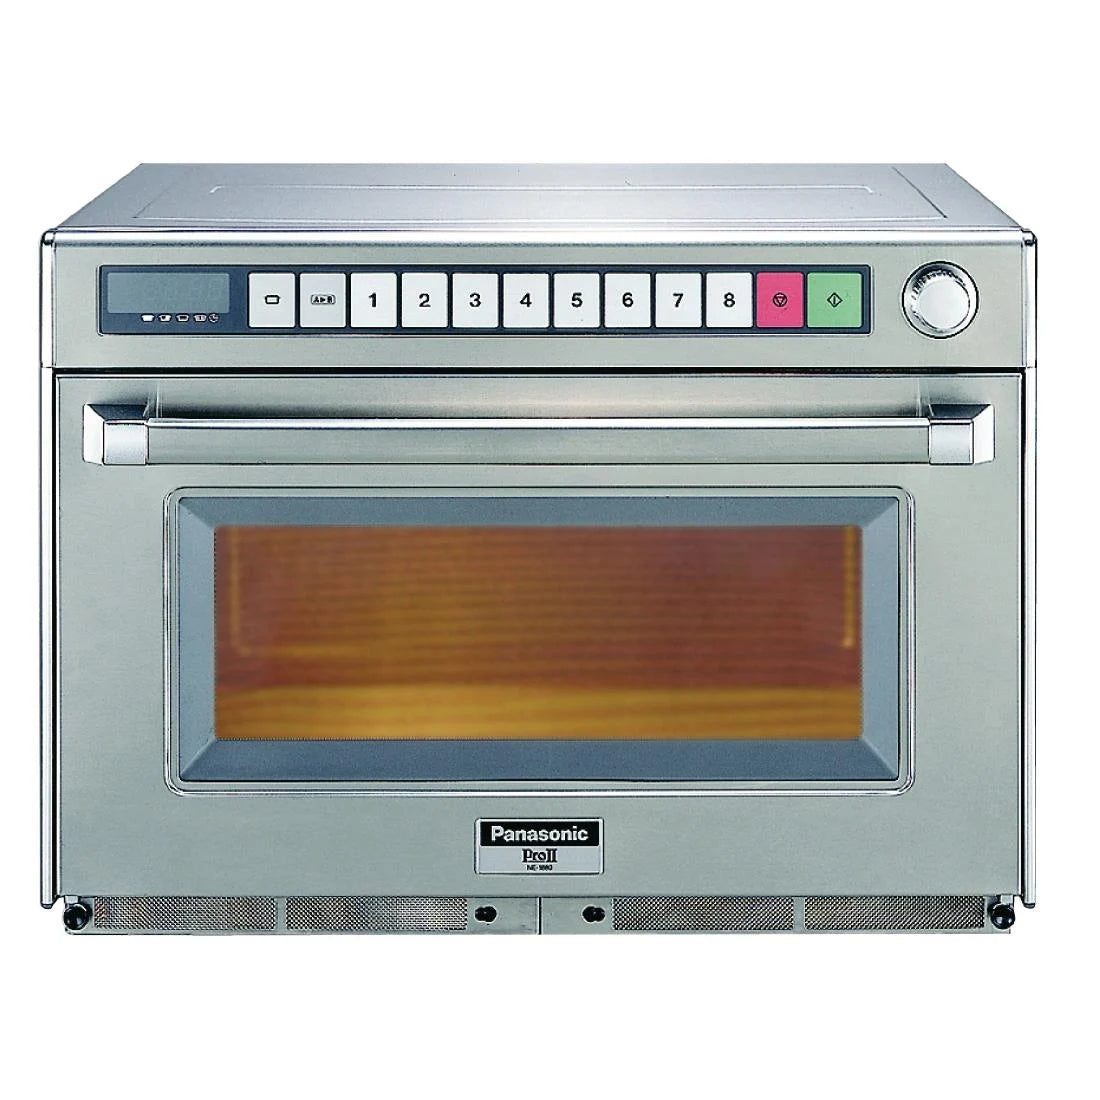 Panasonic Programmable Microwave 44ltr 3200W NE3280BPQ.Product Ref:00594.Model: CD091. 🚚 4-6 Weeks Delivery